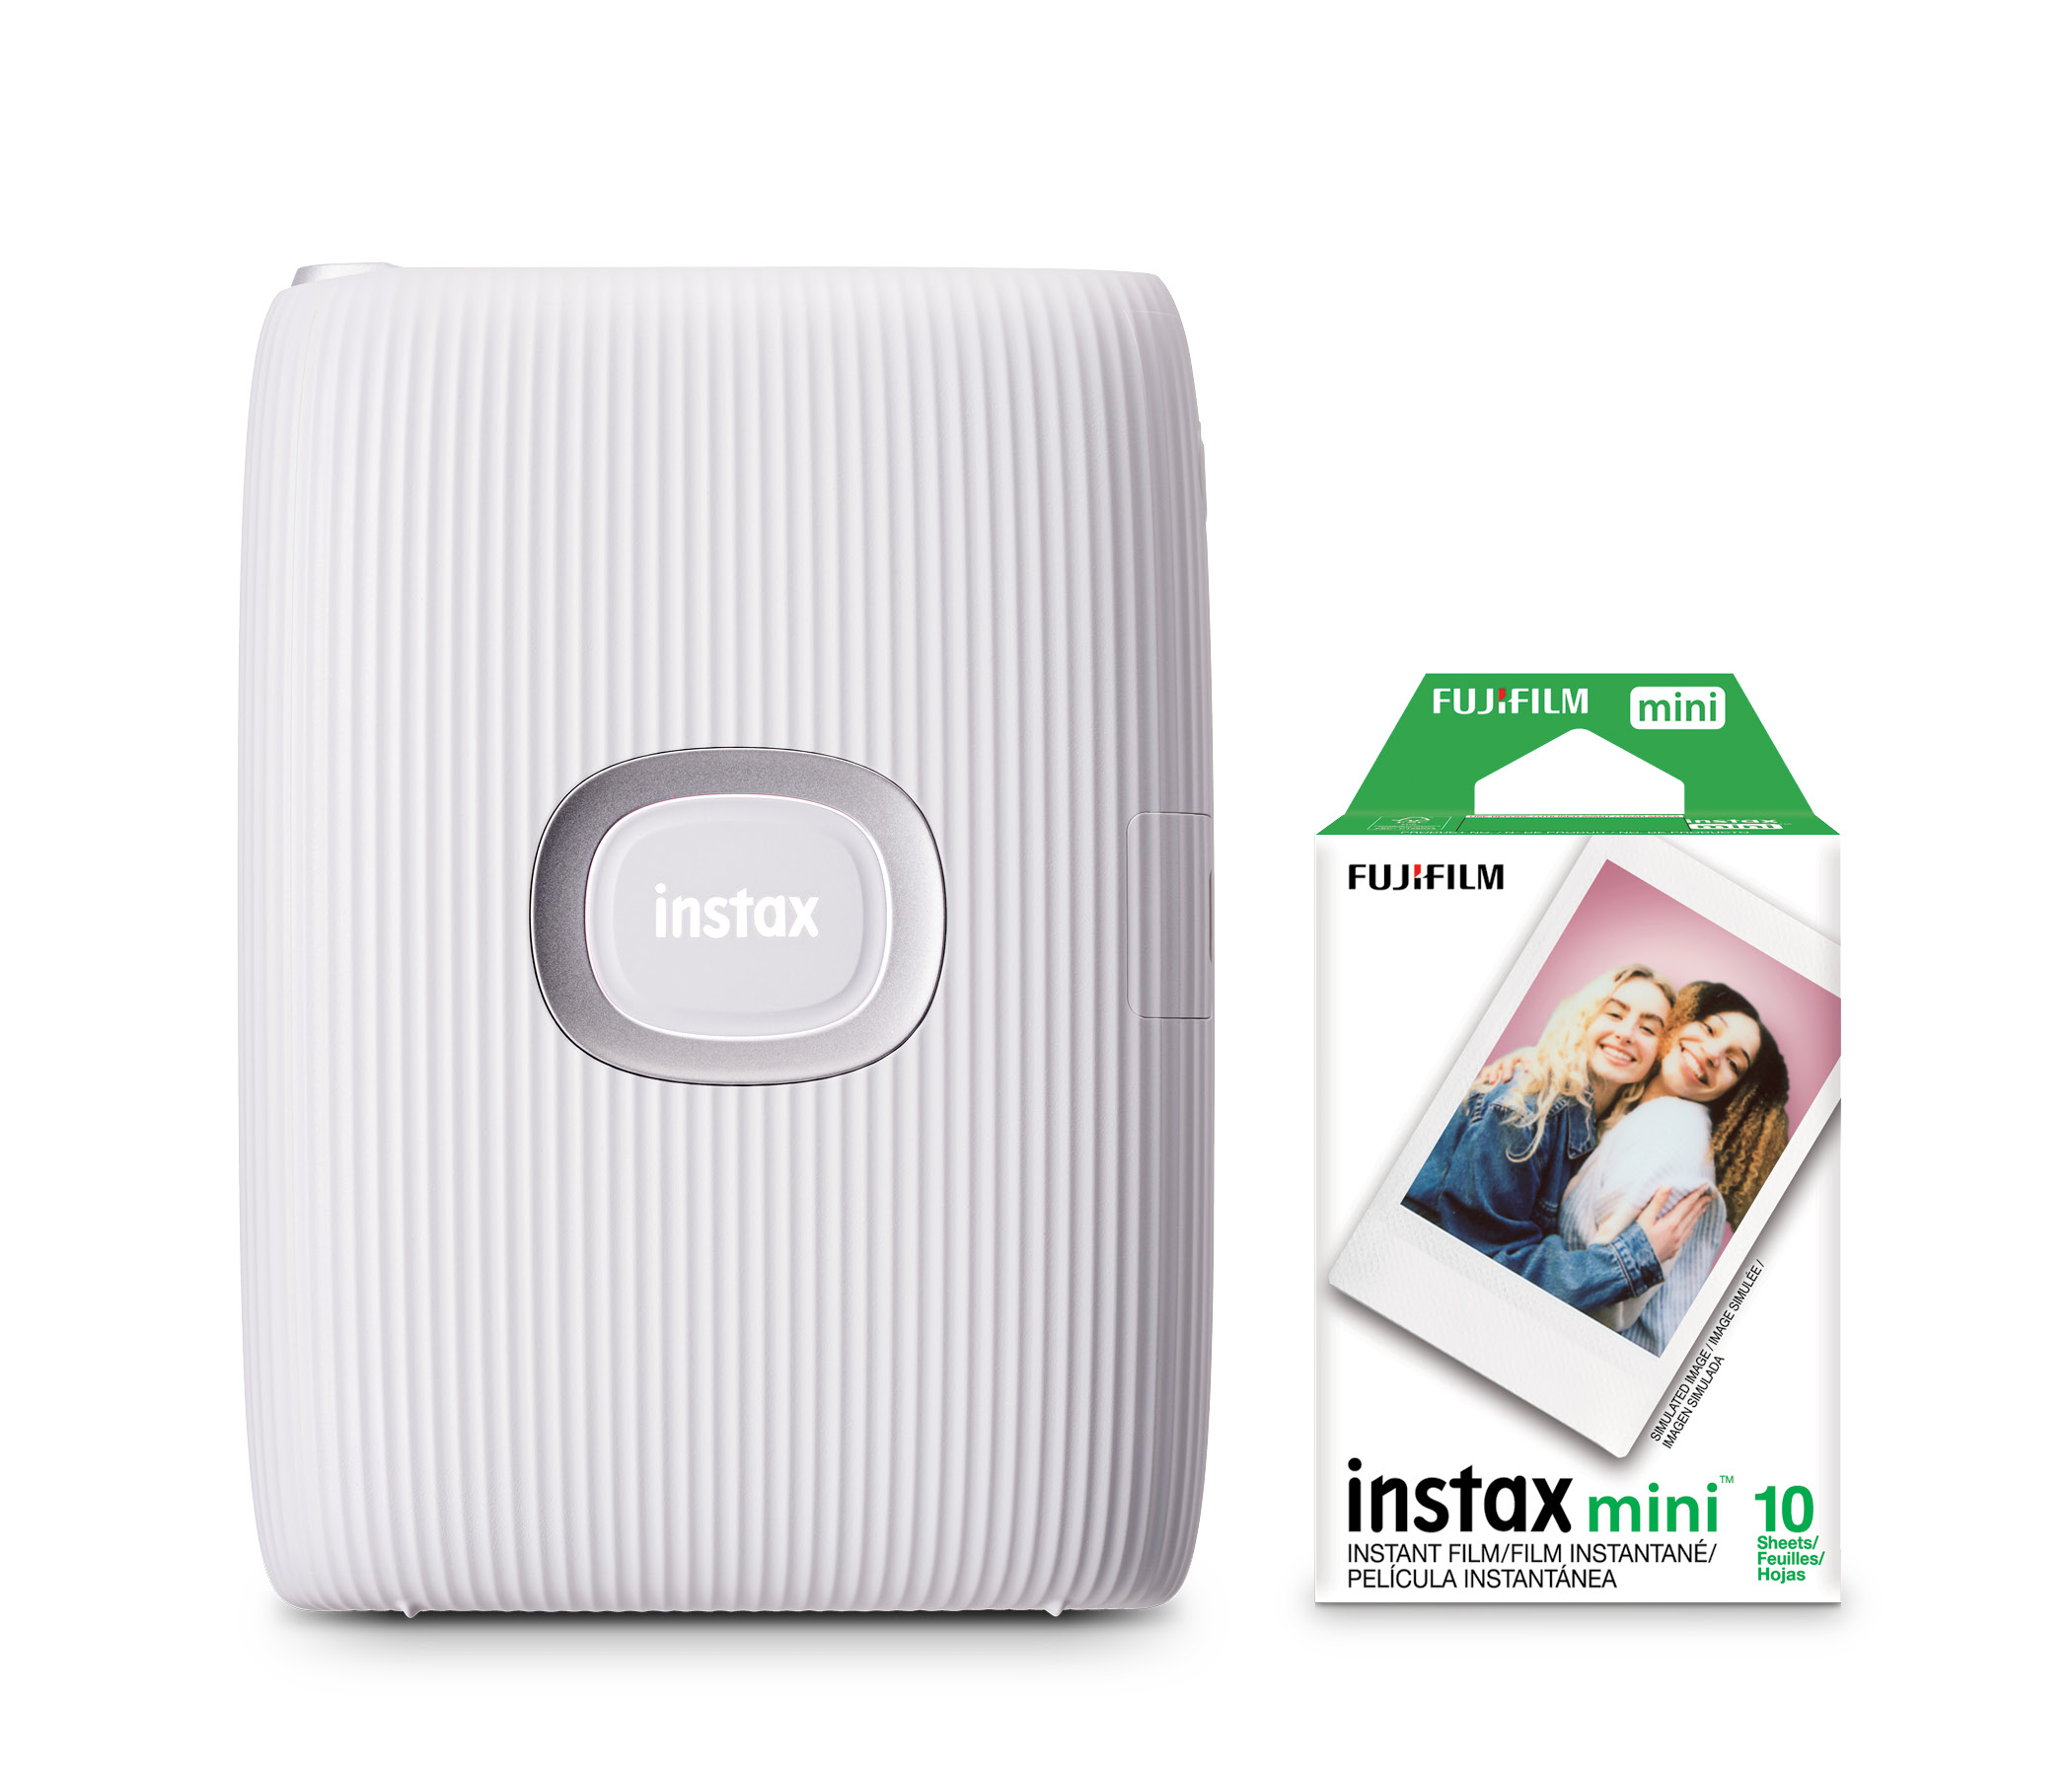 Fujifilm INSTAX Mini Link 2 Smartphone Printer Bundle with Film (10-pack), Clay White - image 1 of 7